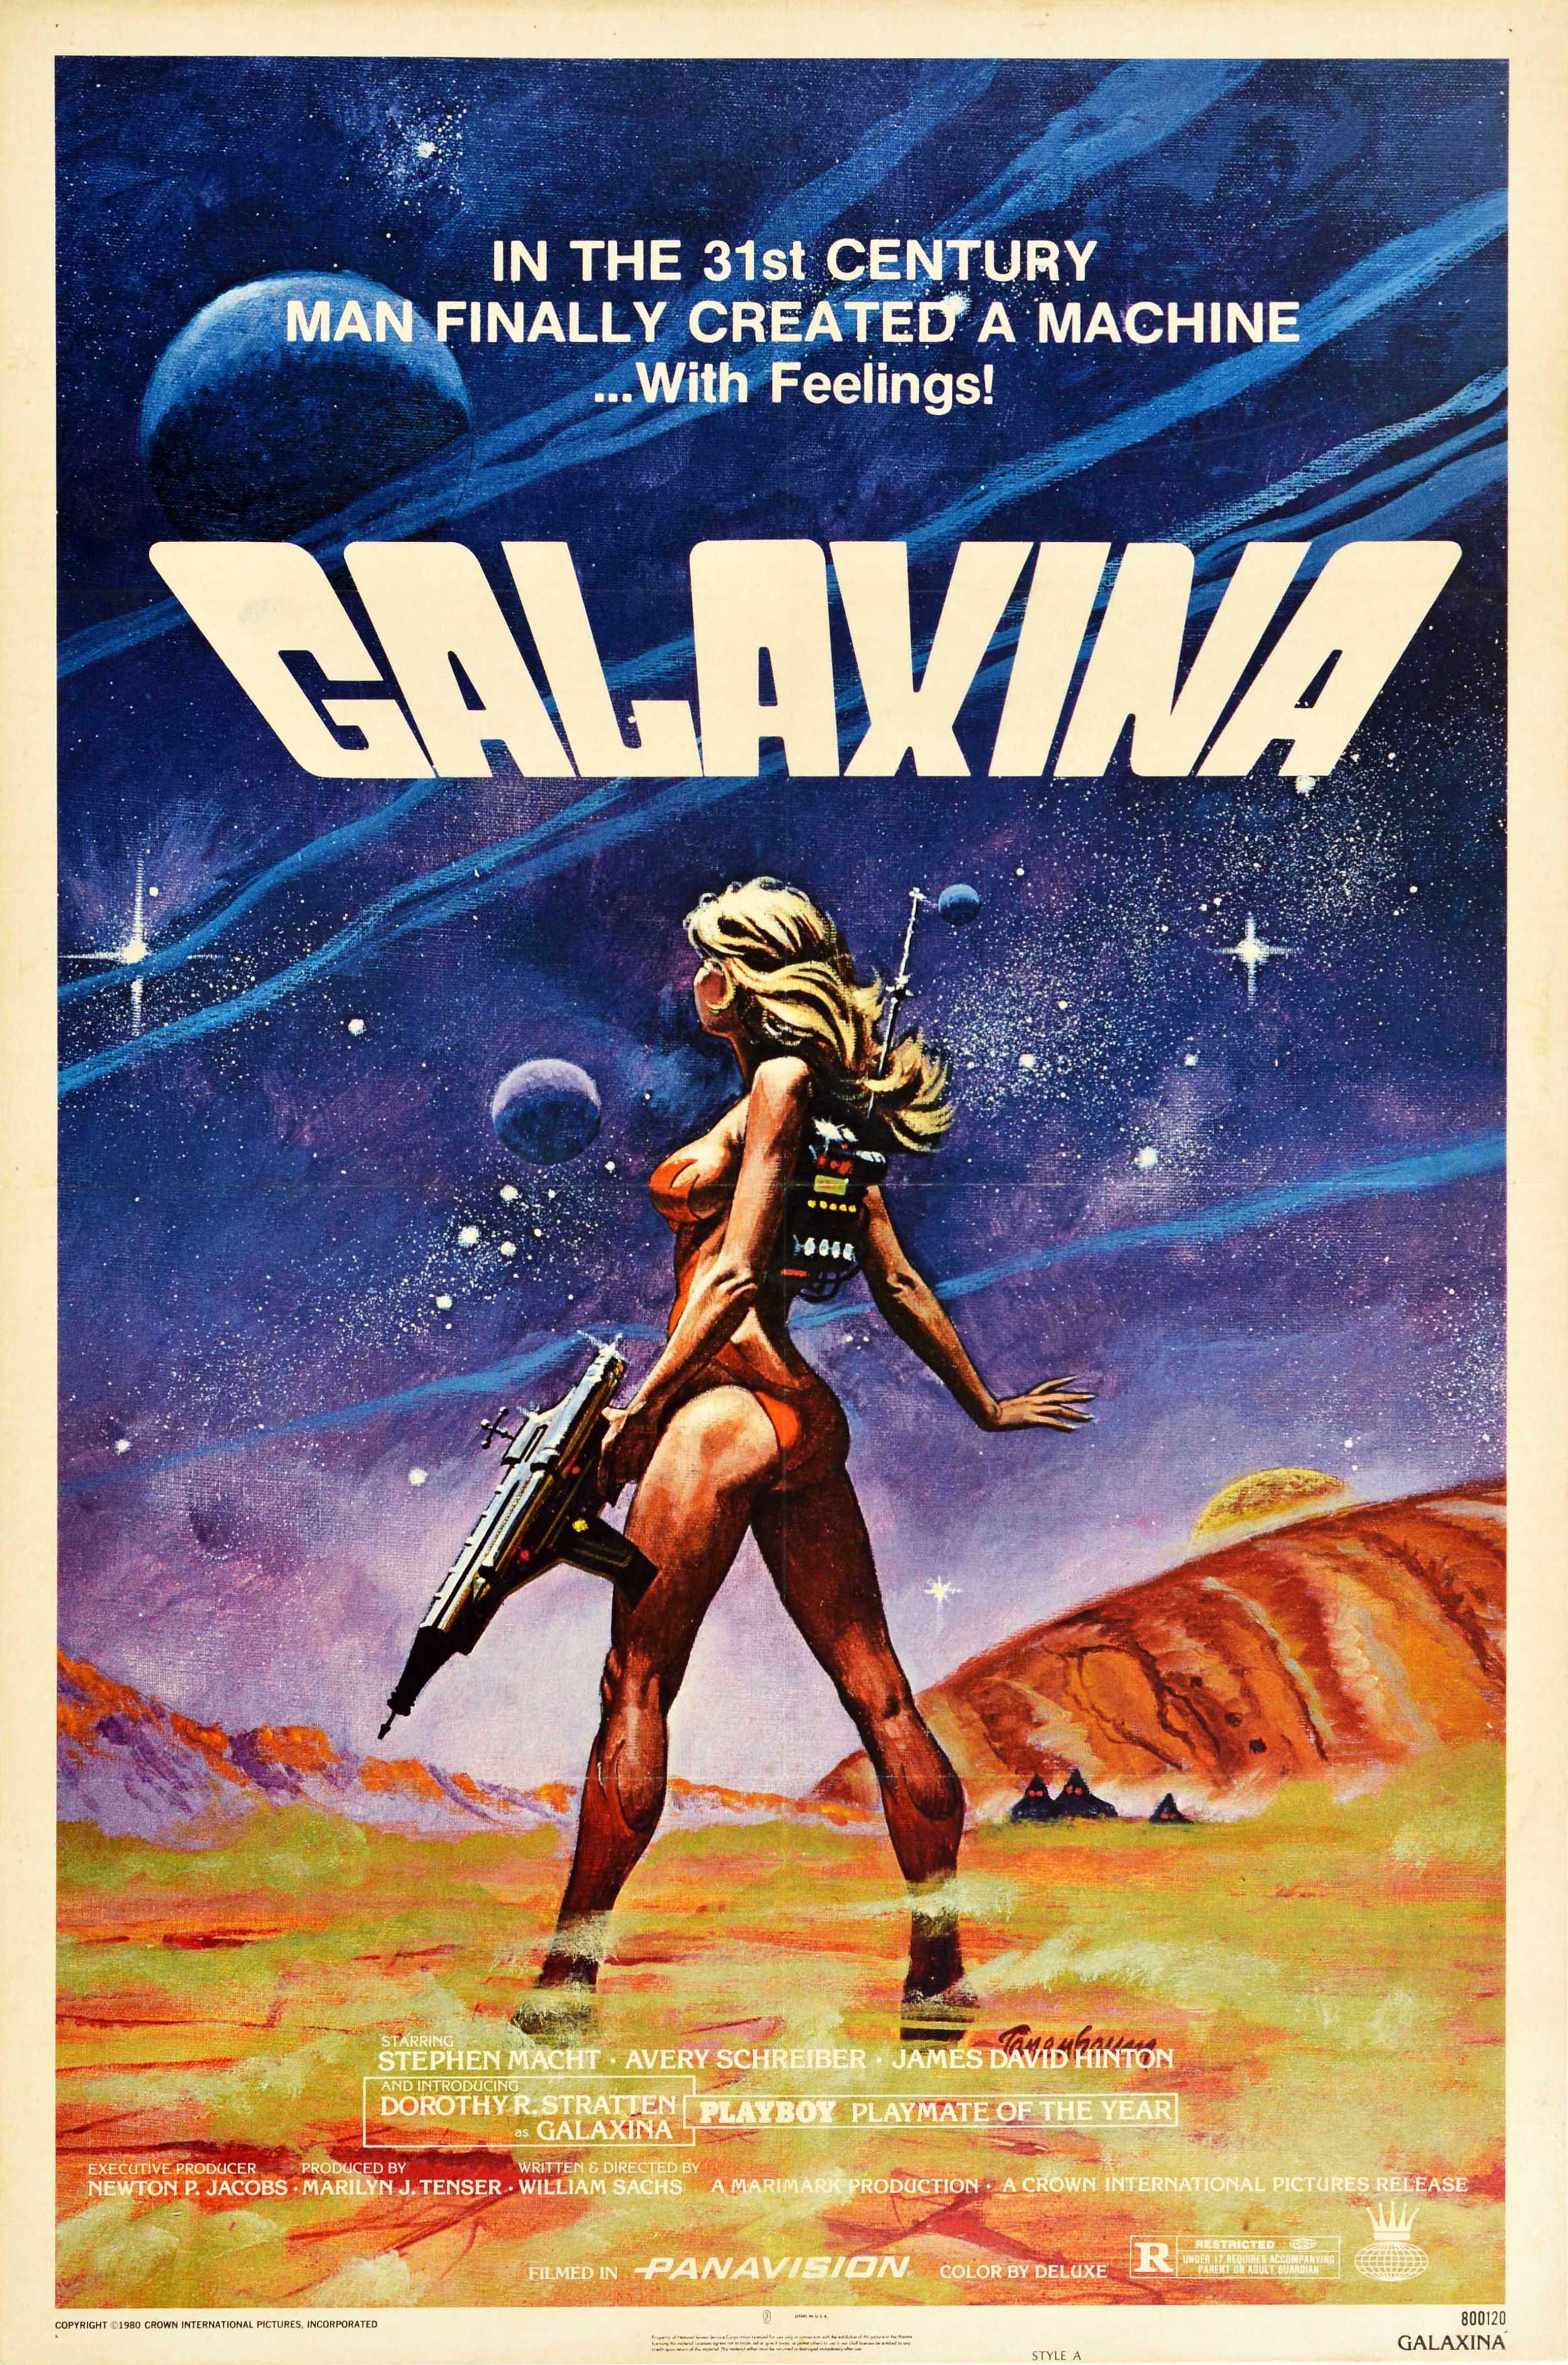 Unknown Print - Original Vintage Movie Poster Galaxina American Science Fiction SciFi Space